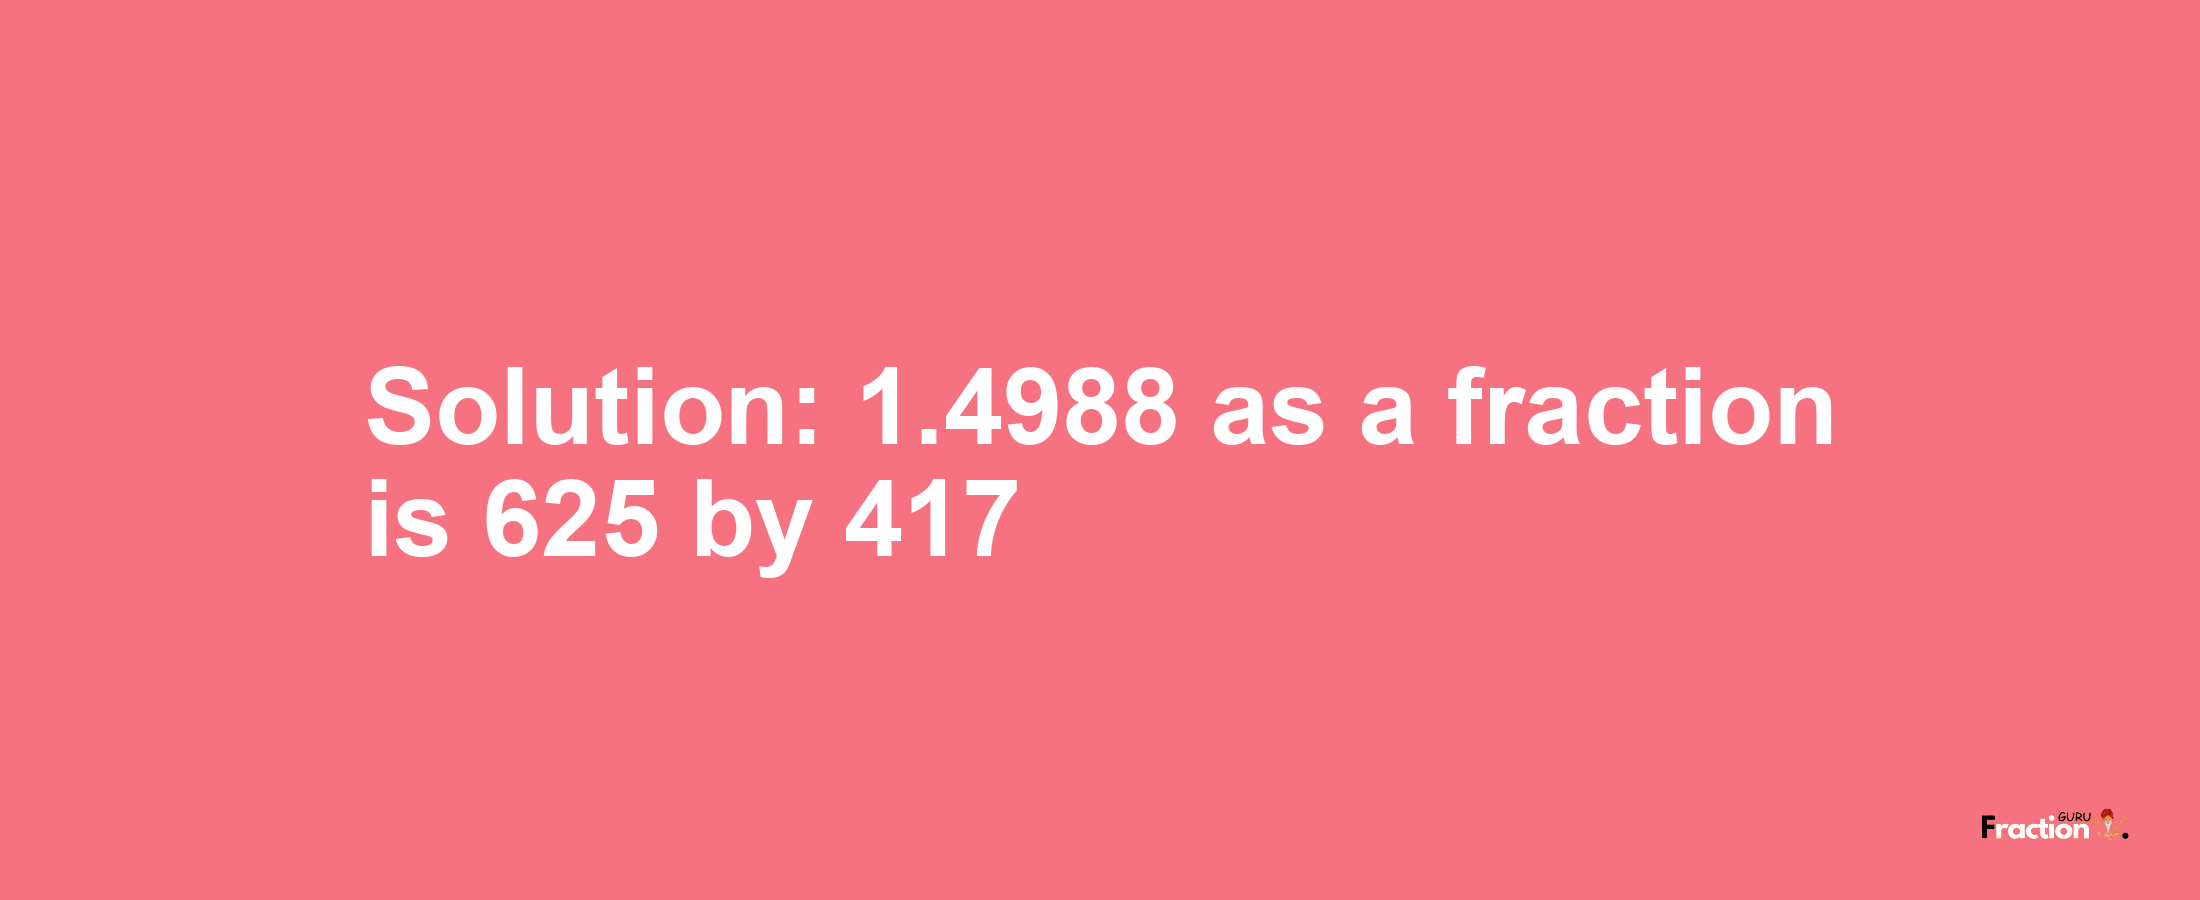 Solution:1.4988 as a fraction is 625/417